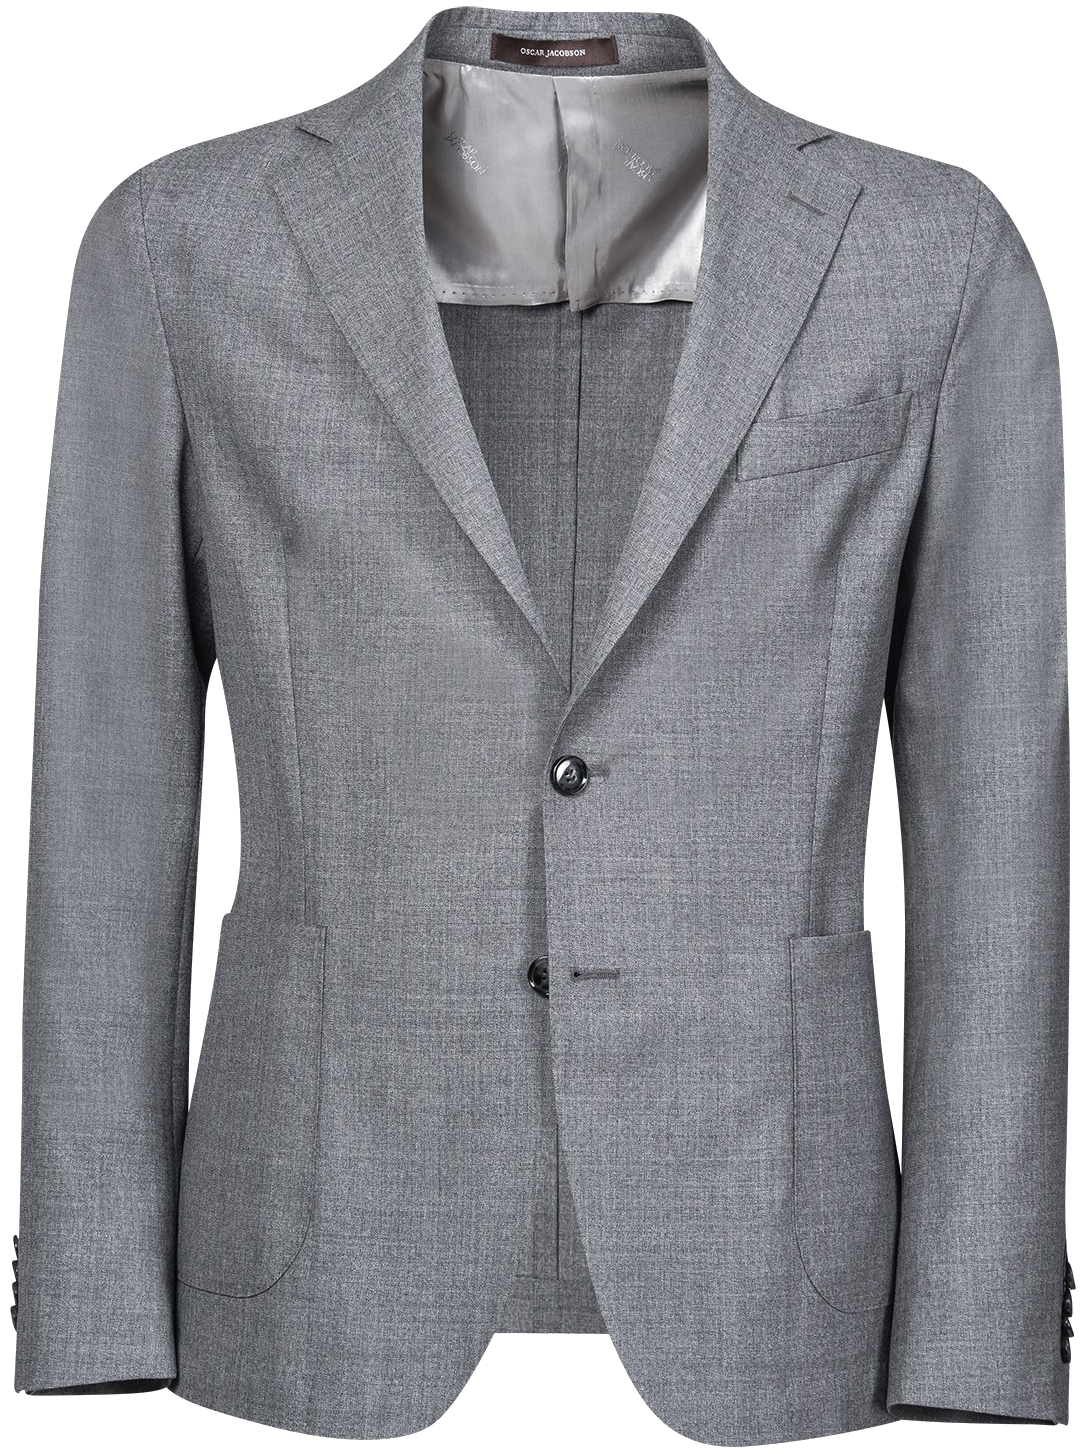 A Grey Suit Jacket With A Black Background